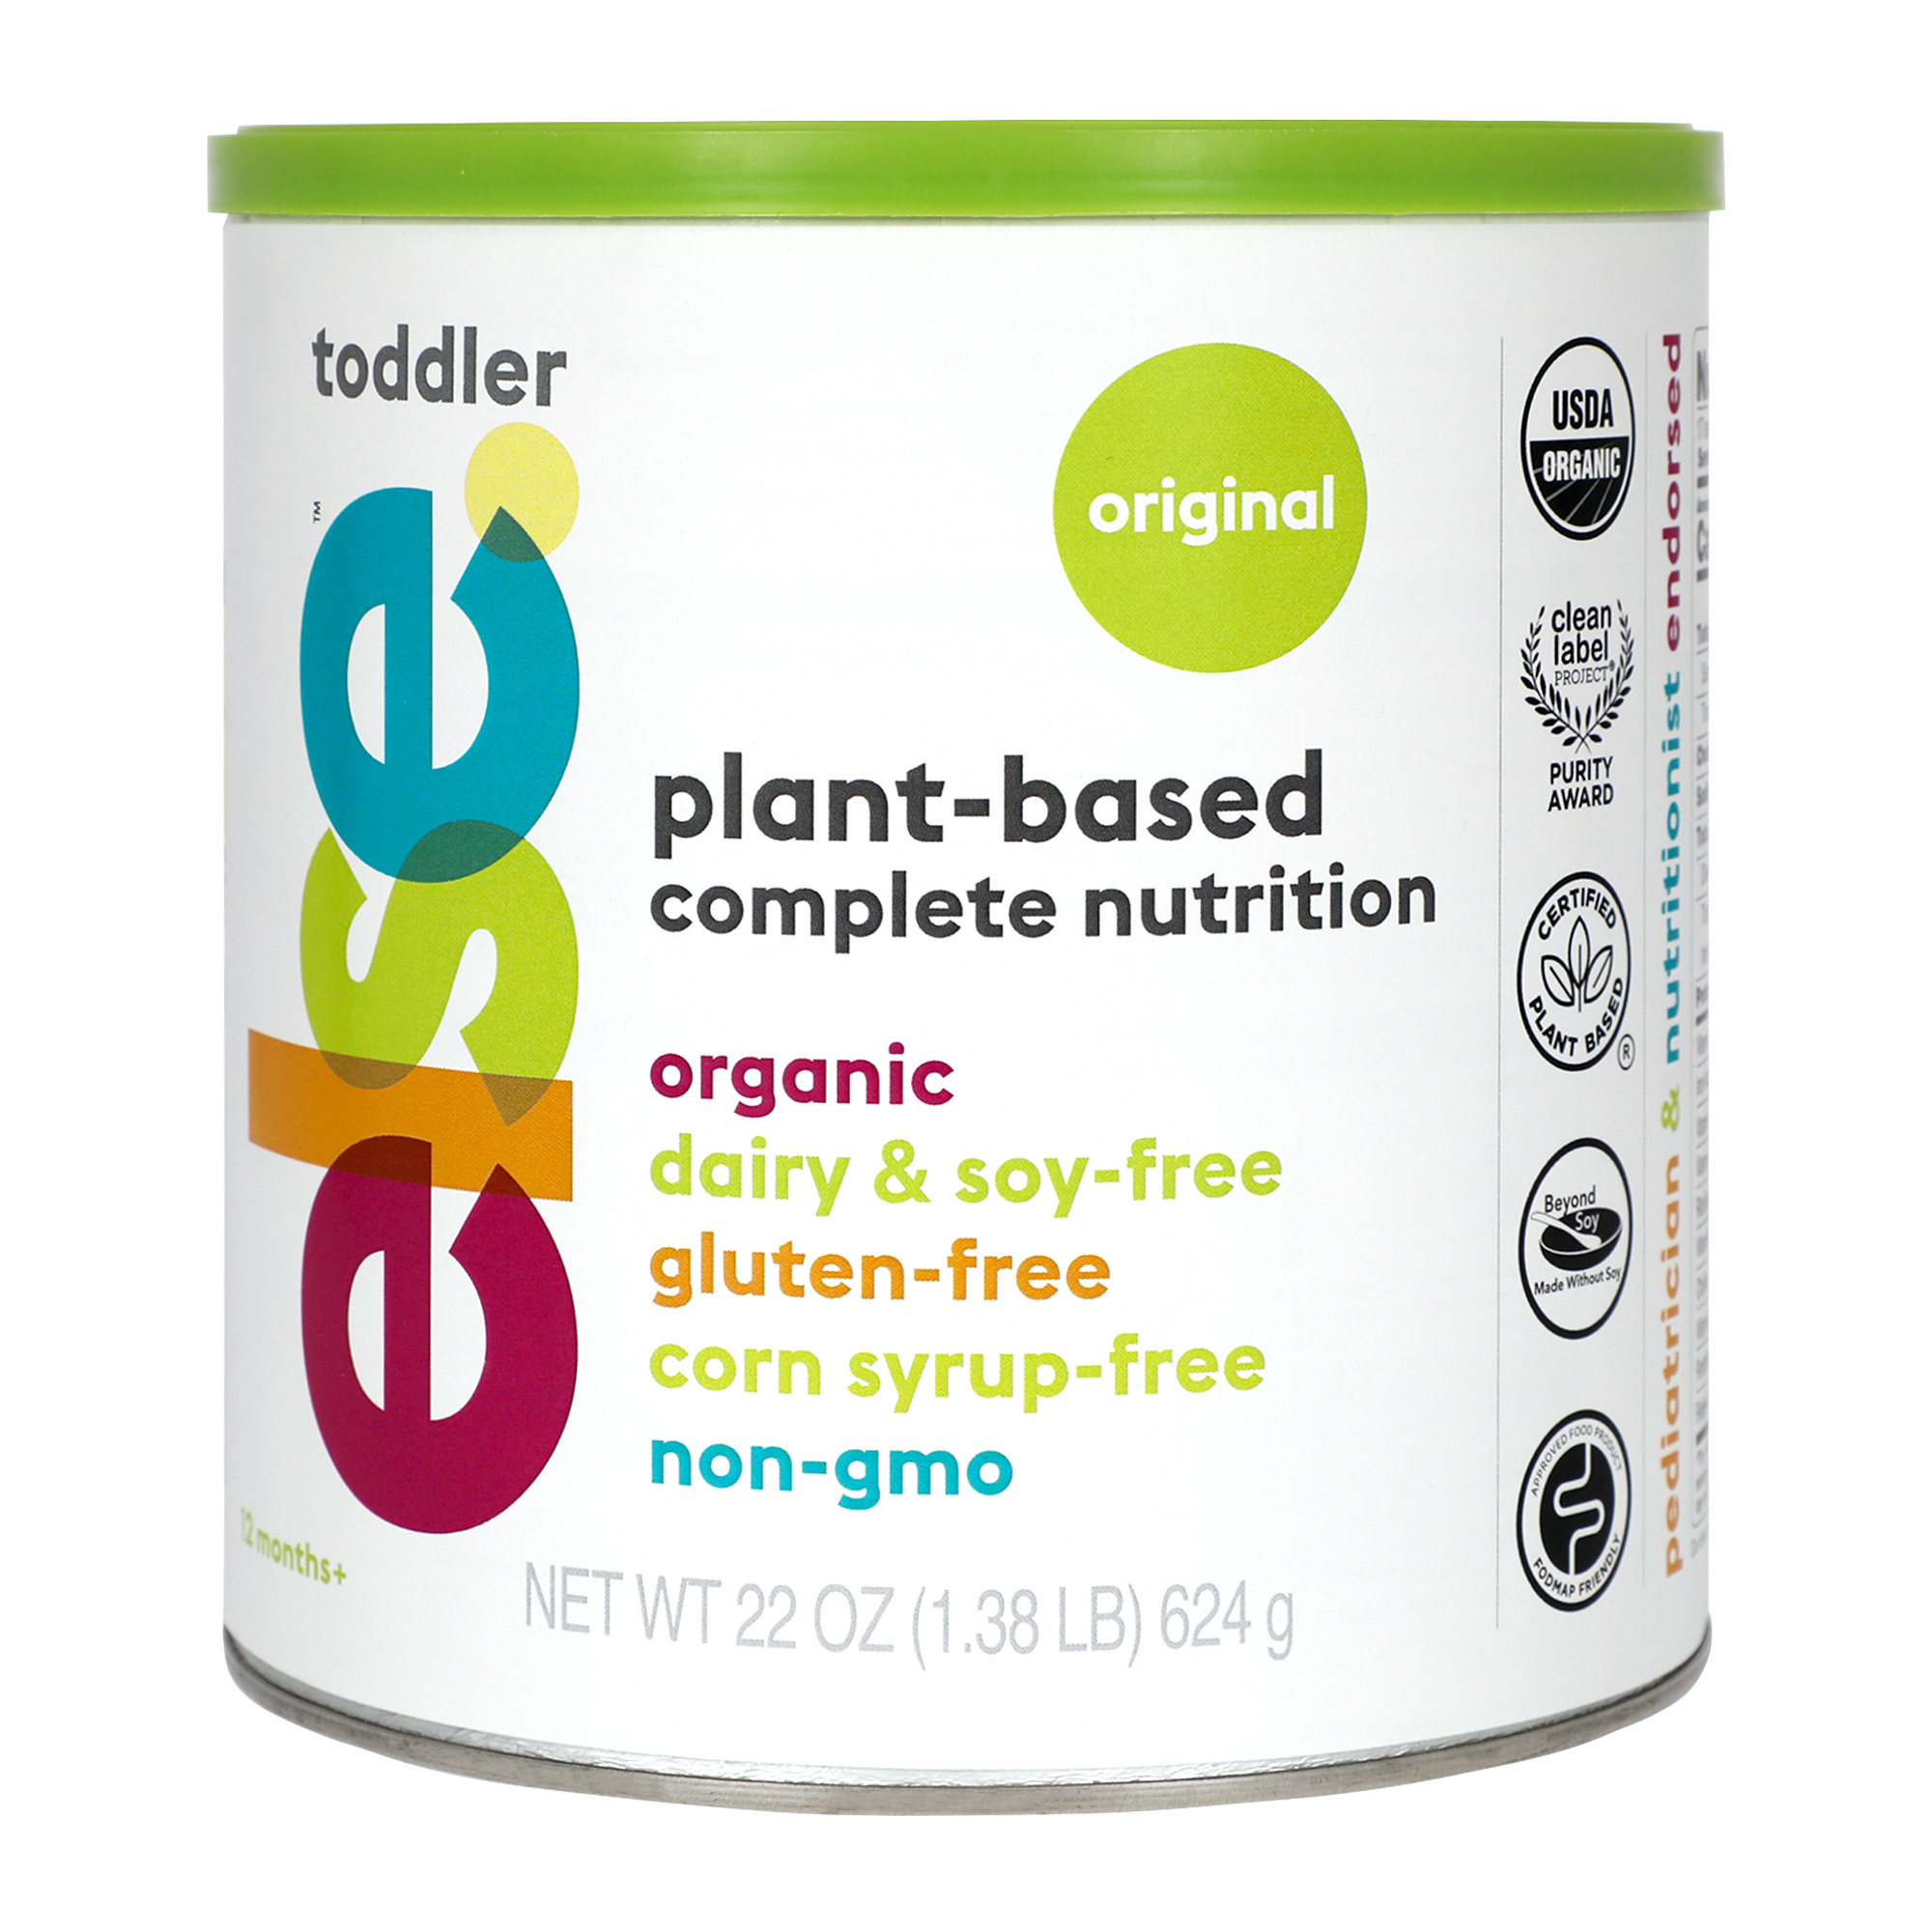 Else Nutrition Plant-Based Complete Nutrition for Toddlers Organic 6 units per case 22.0 oz